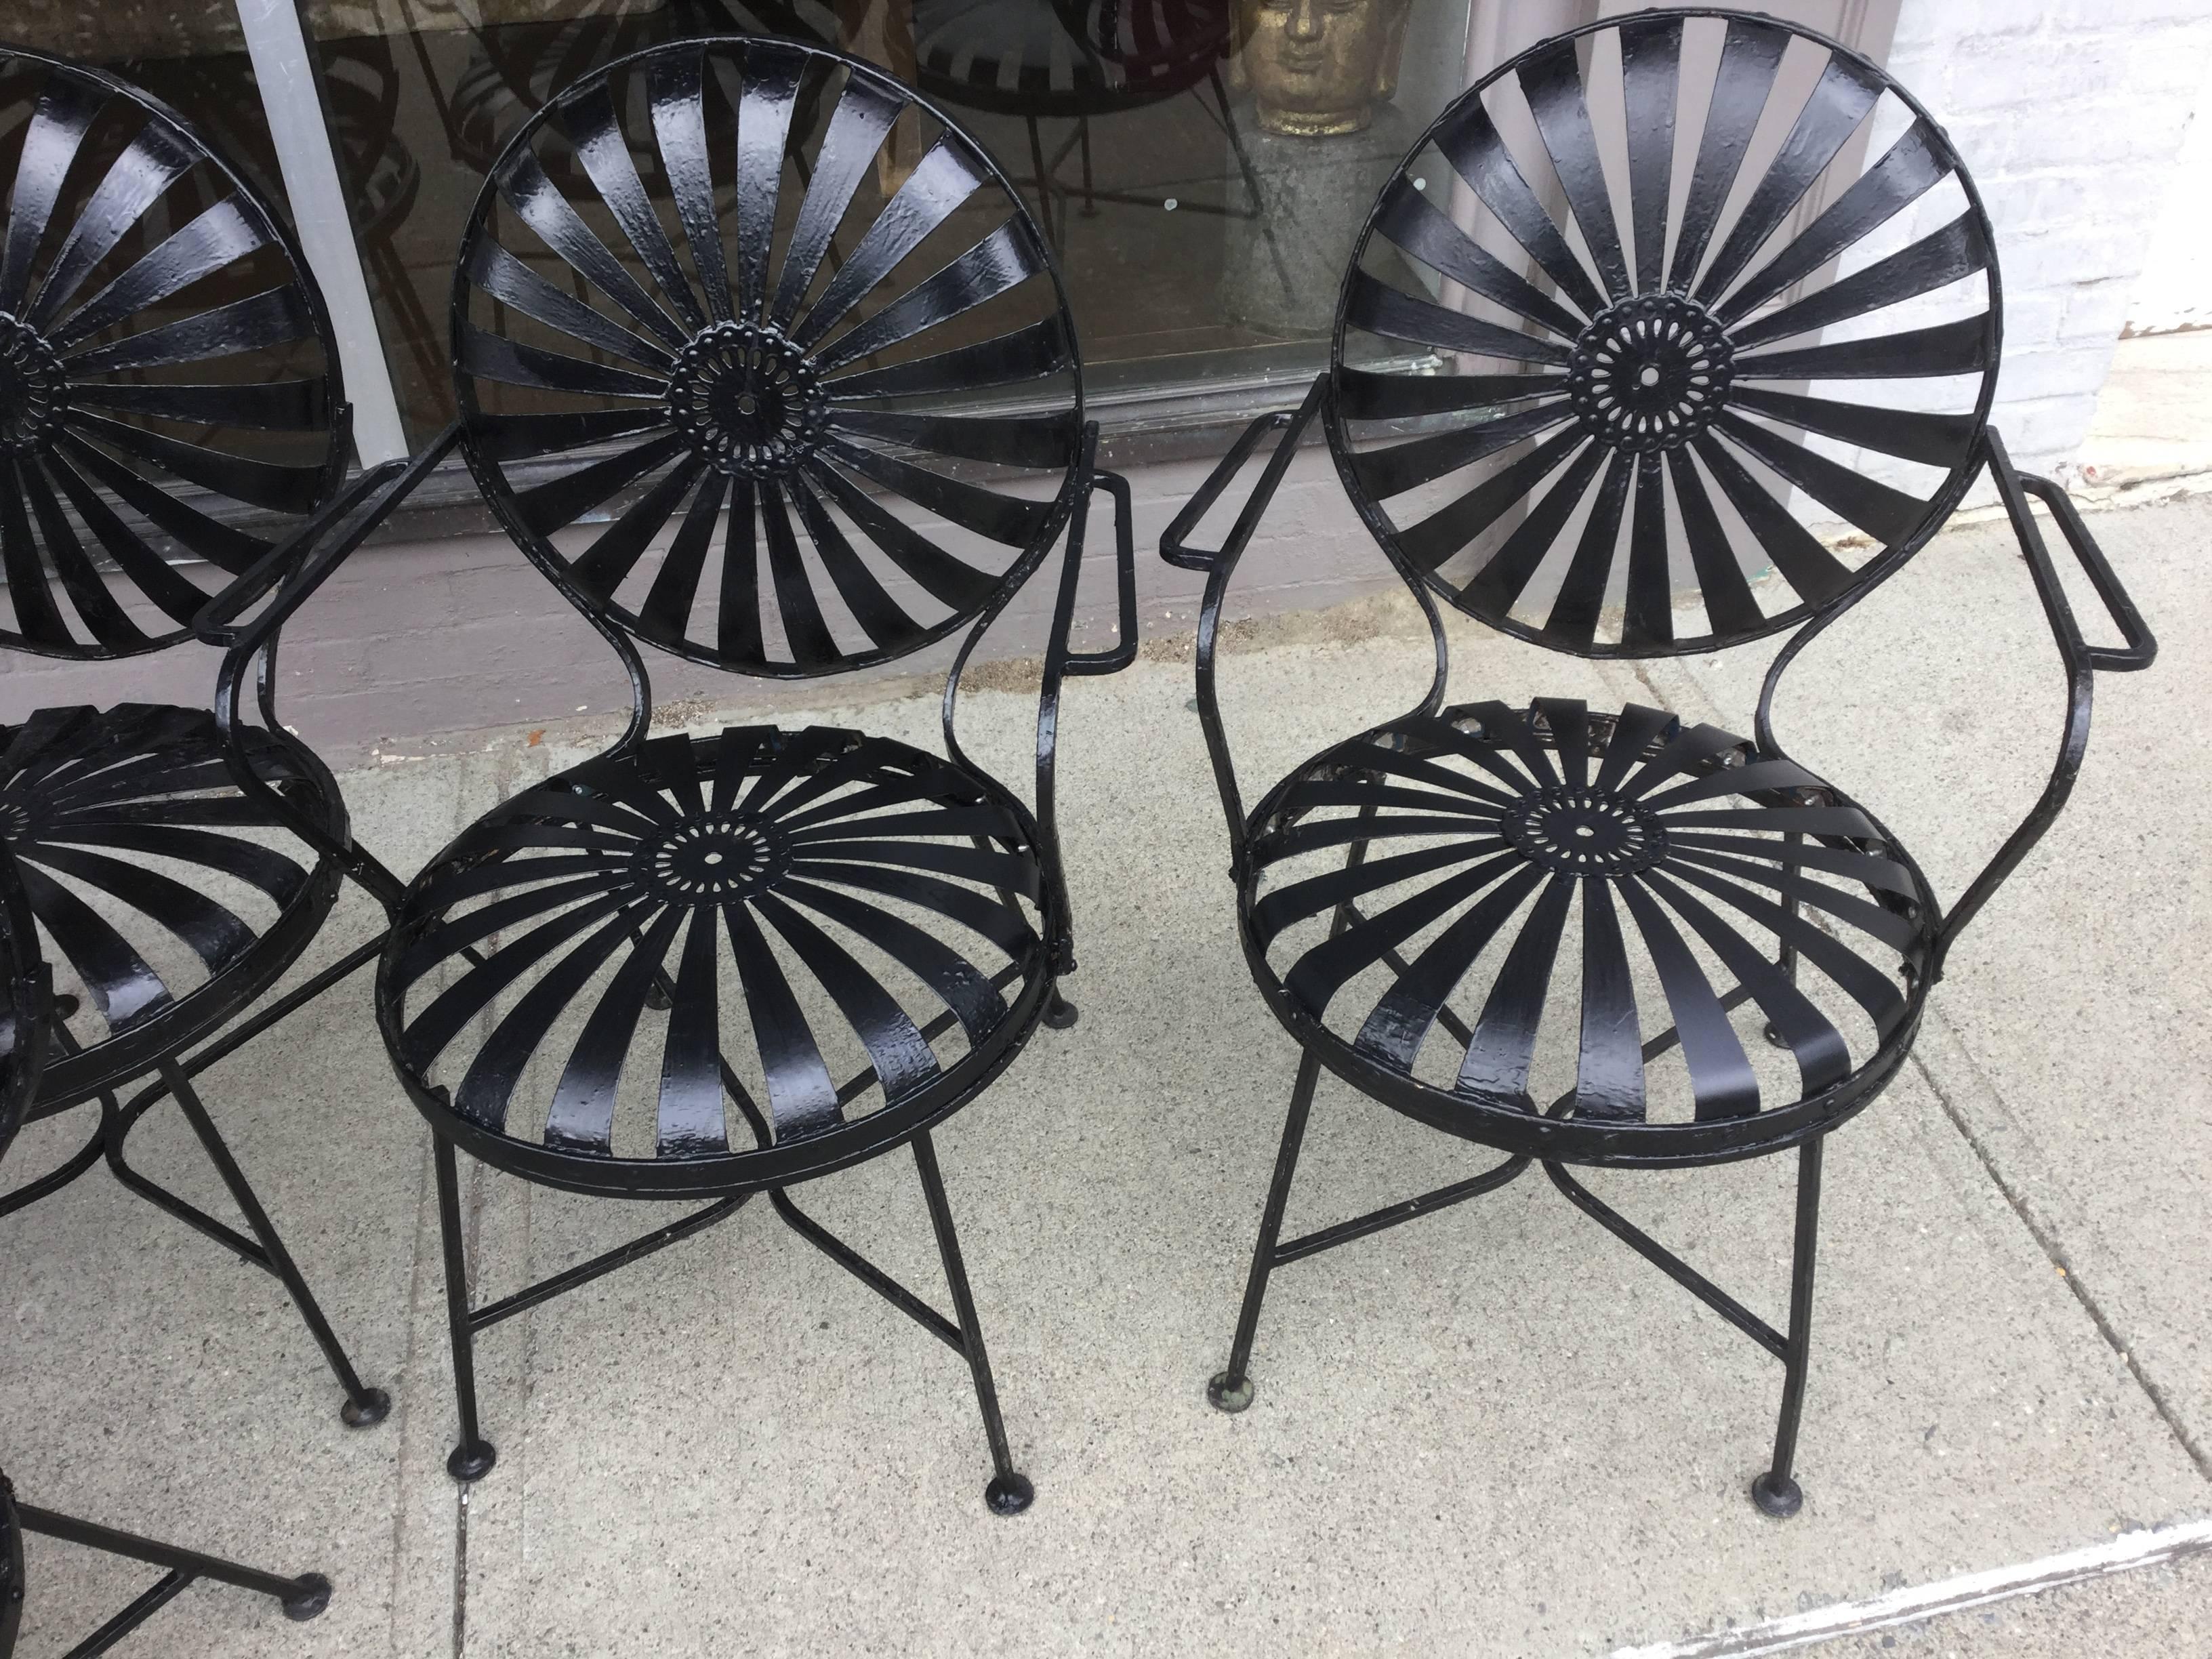 Set of six Francois Jarre chairs. Some people call these springer chairs or sunburst chairs. Originally designed circa 1920 in France, this were made in the 1950s. The legs and armrests have a more modern design than the earlier chairs. There are